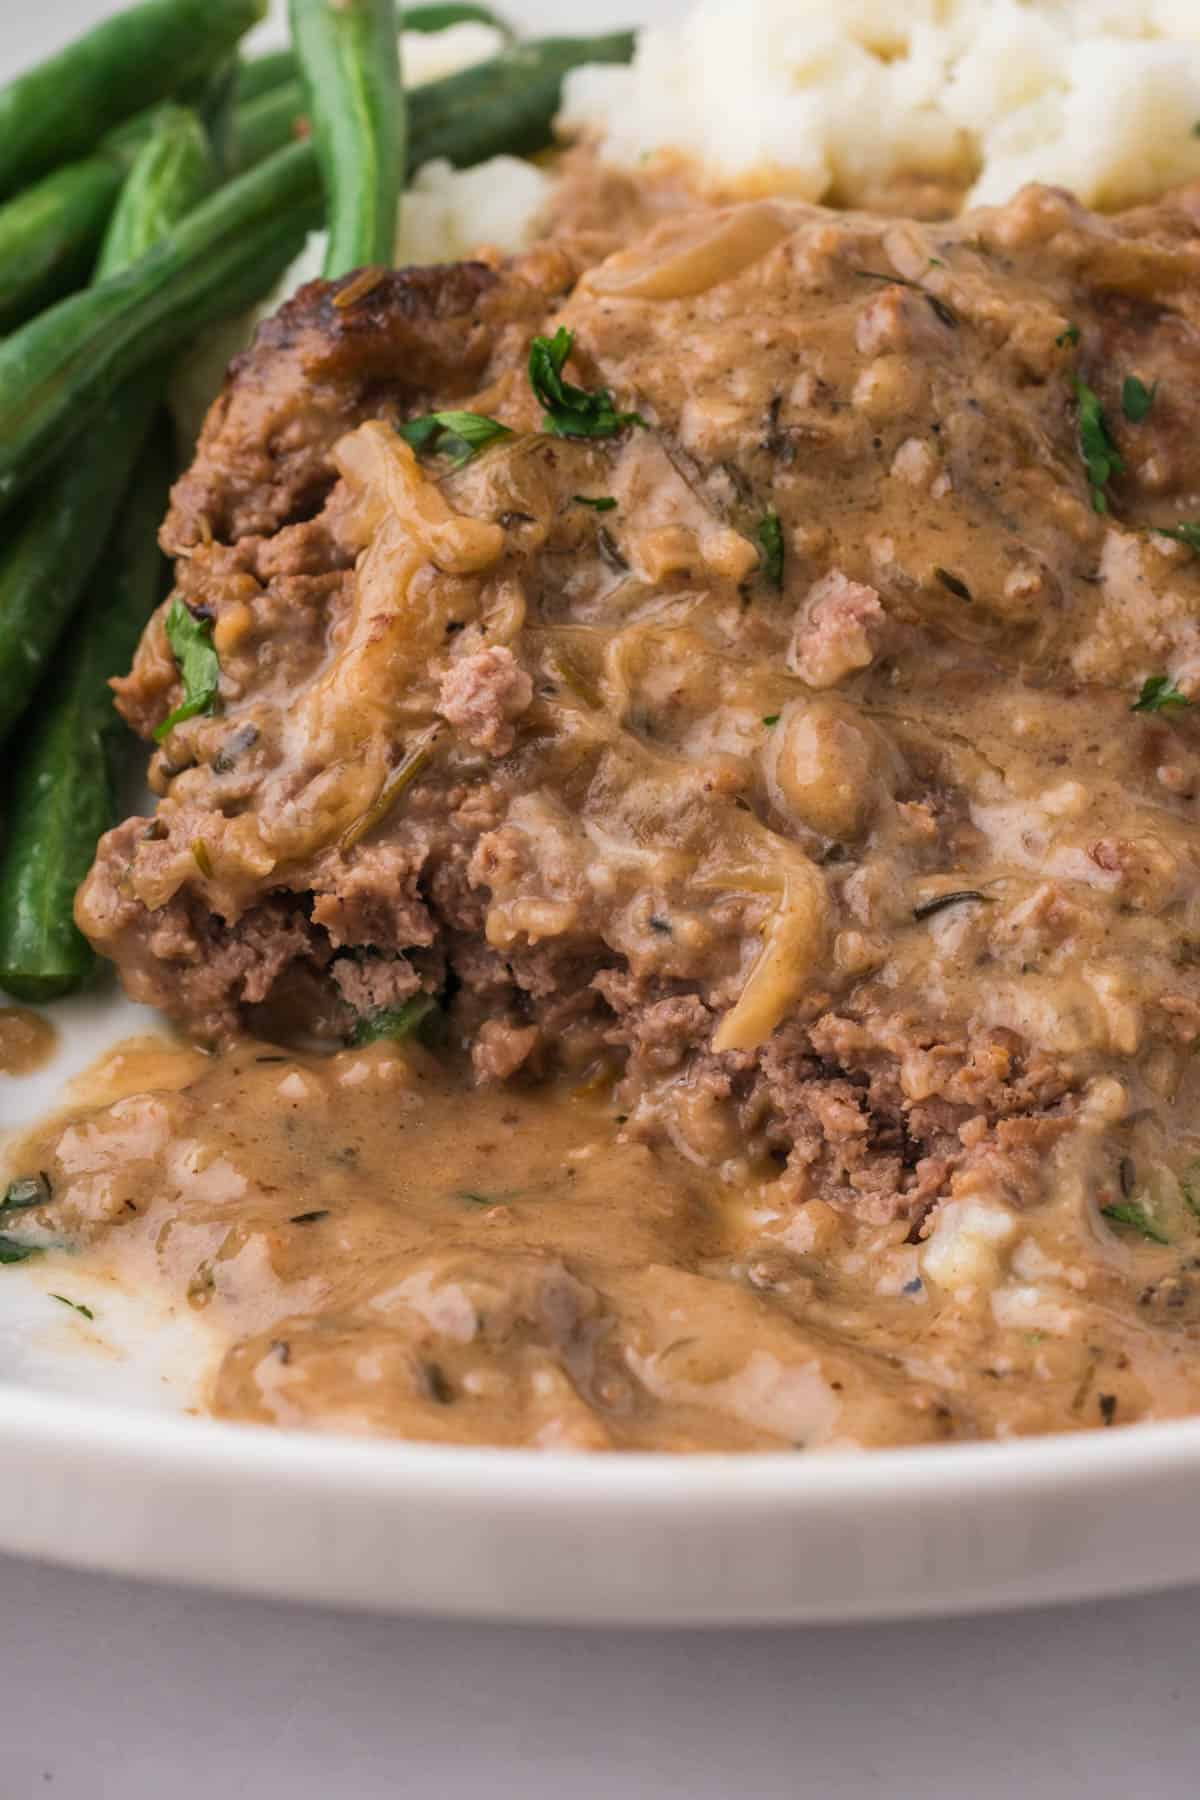 A close image of a tender cube steak with onion gravy on a plate.